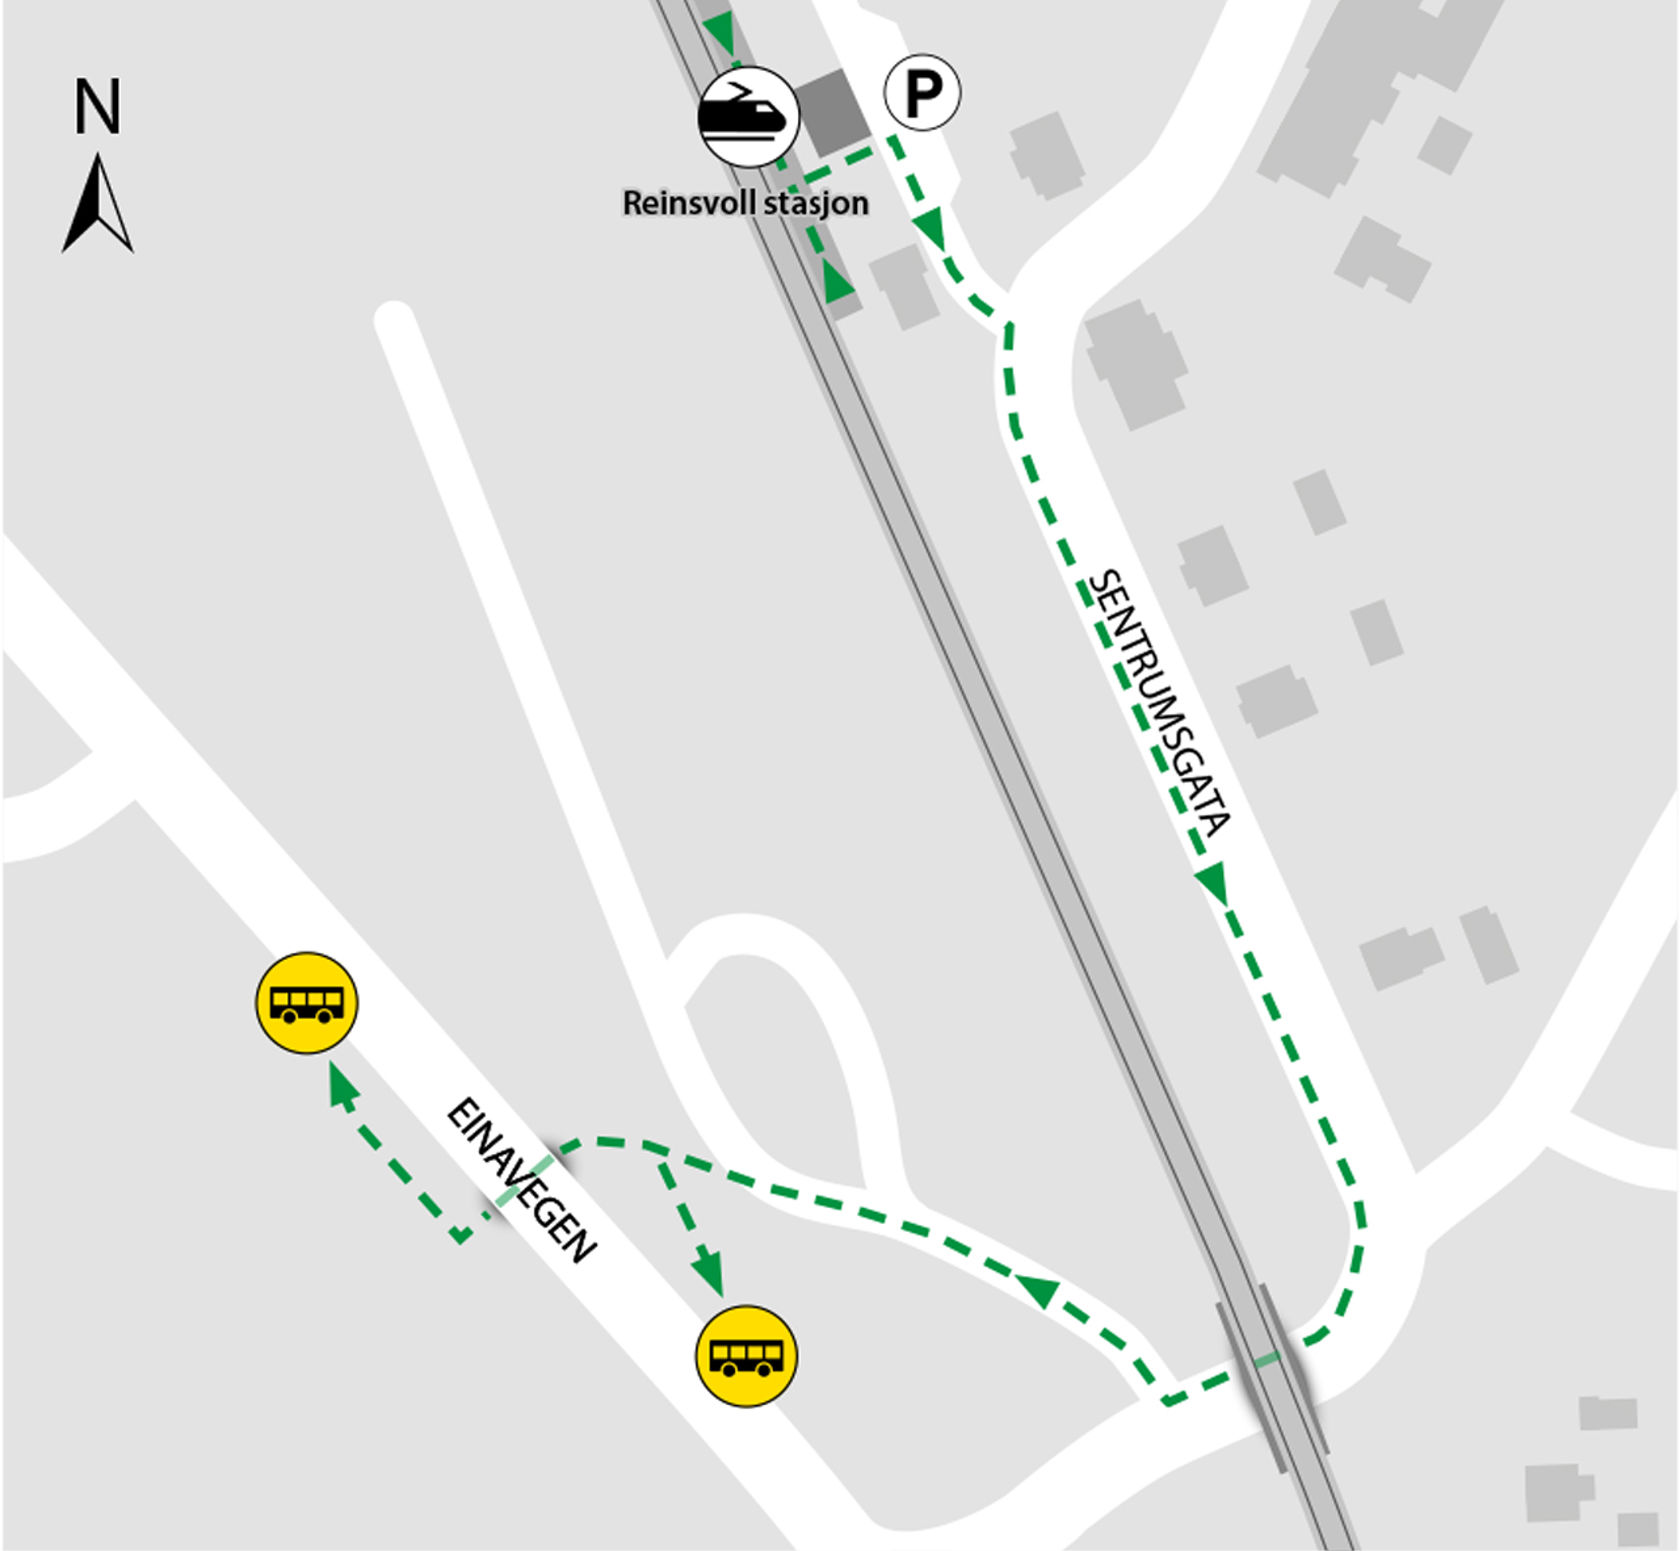 Map shows rail replacement service departs from bus stops Reinsvoll coach station.